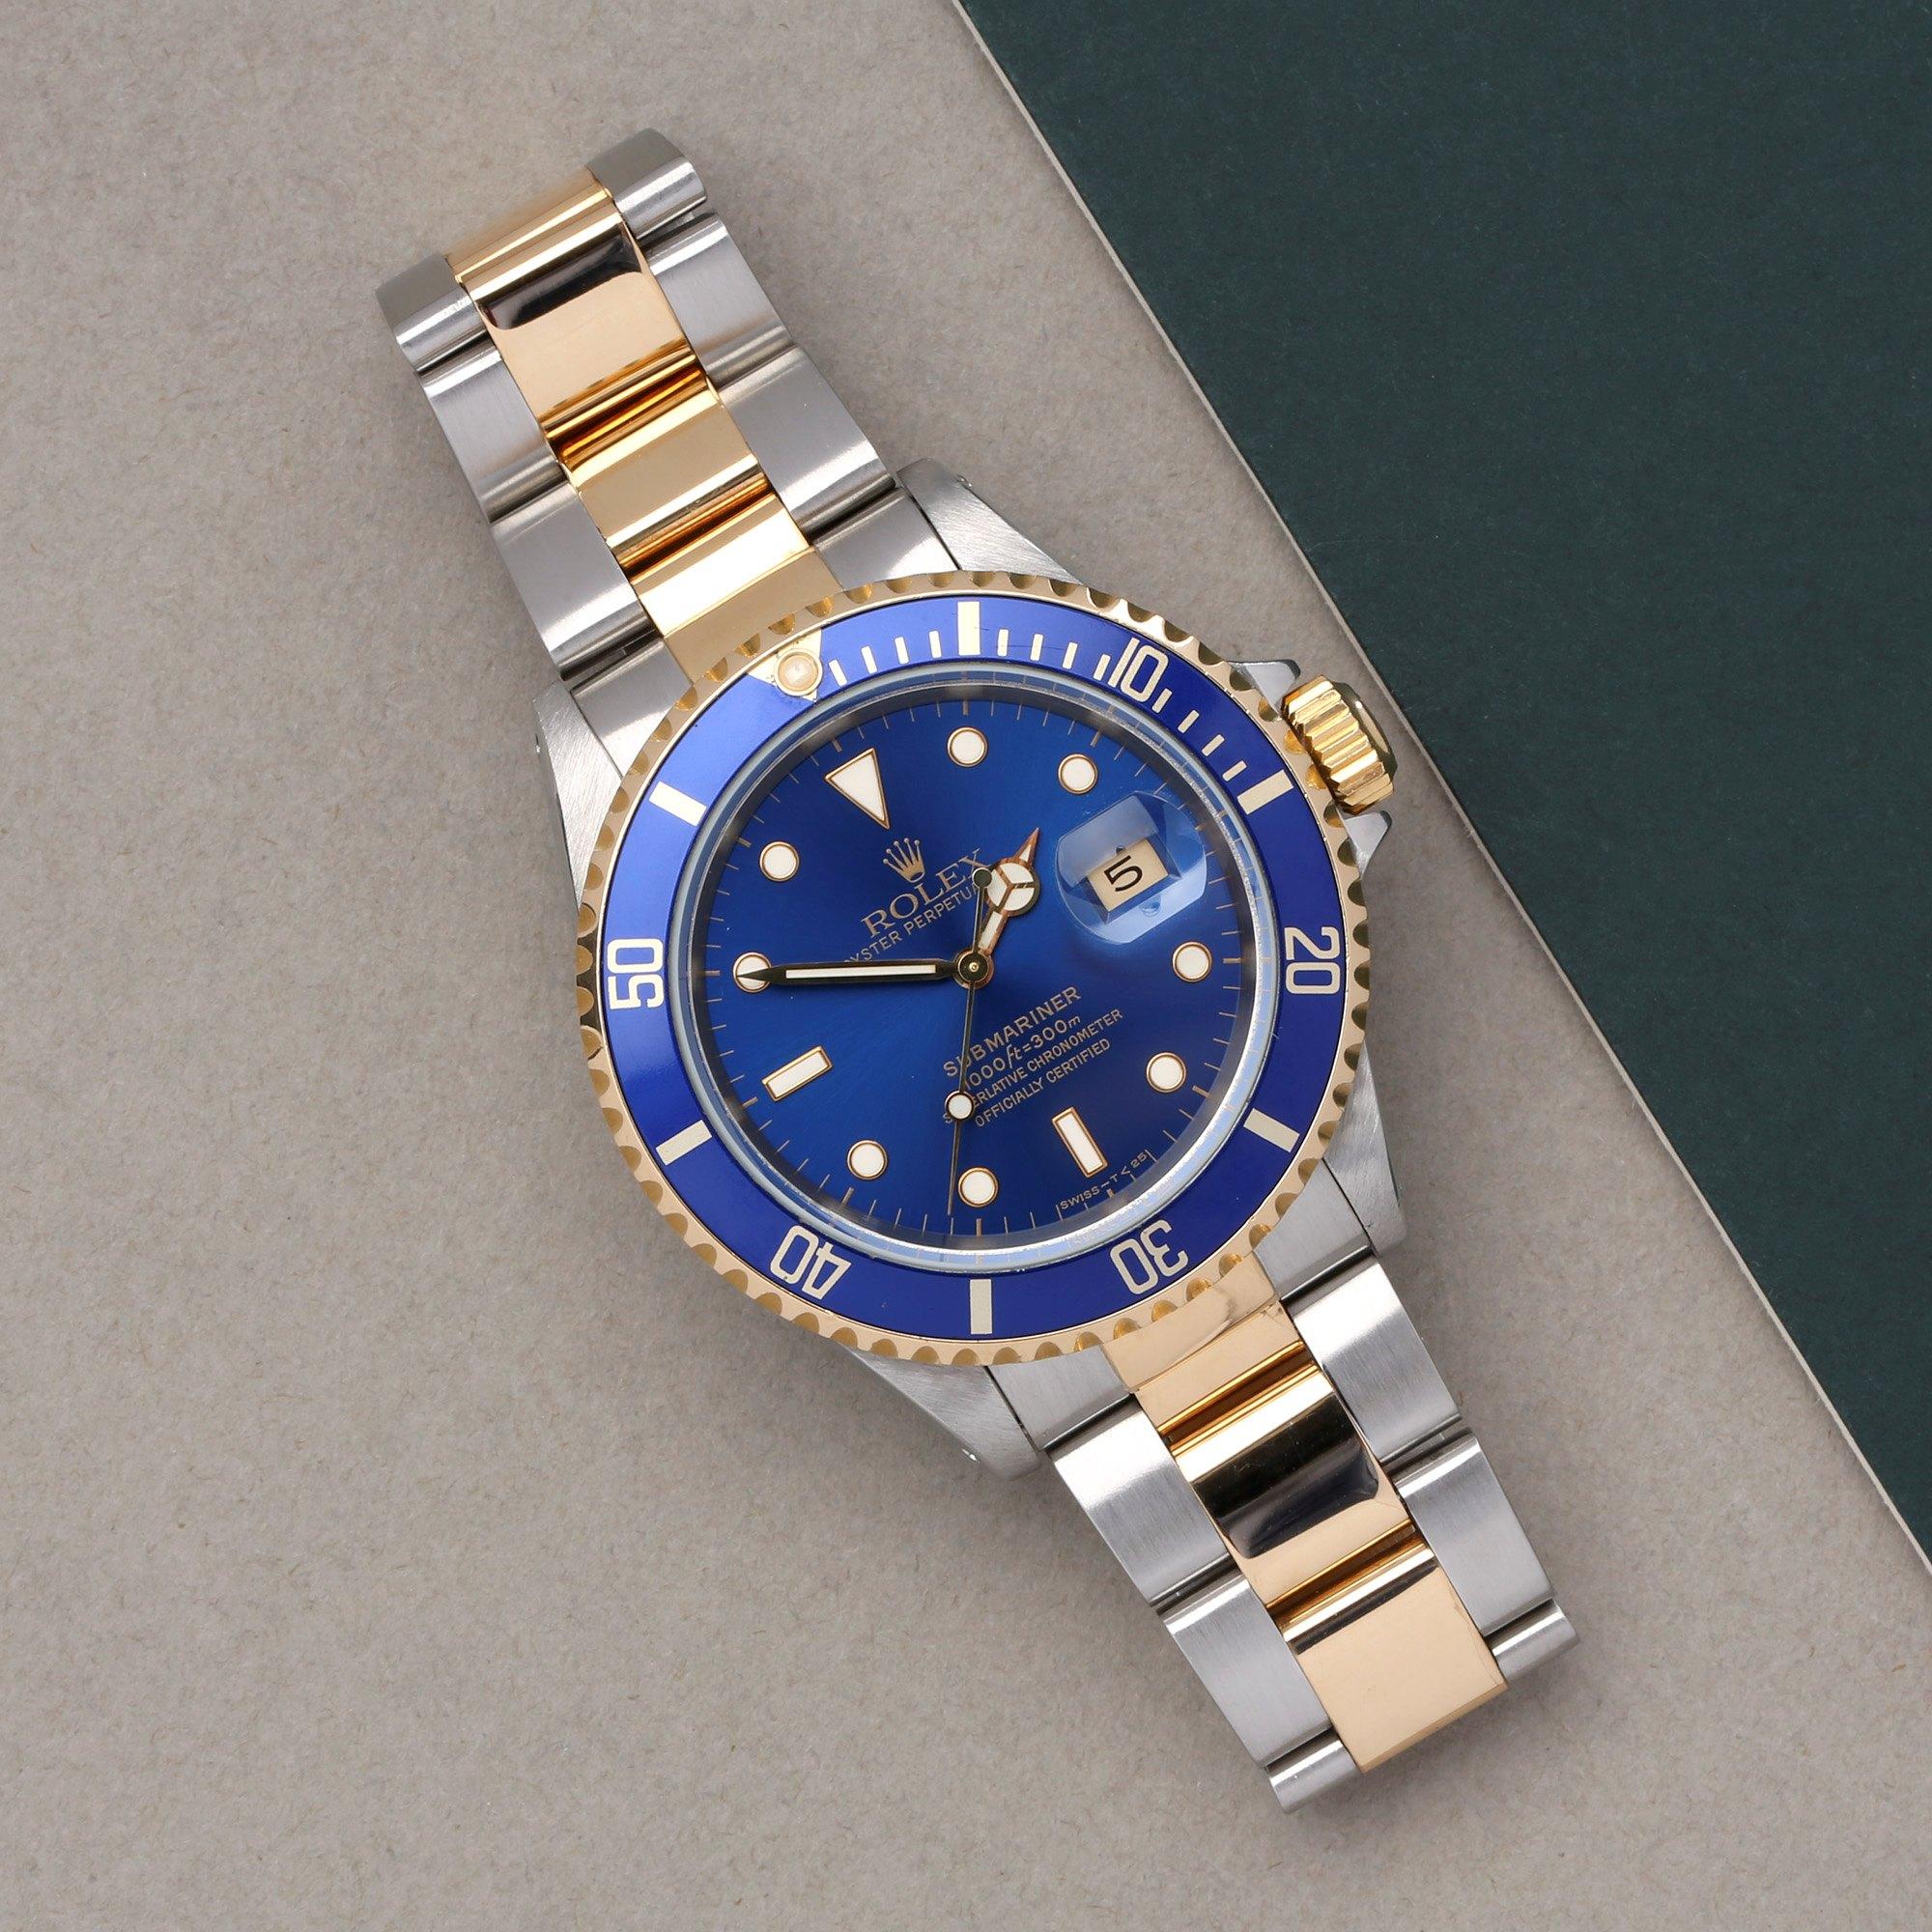 Xupes Reference: W007596
Manufacturer: Rolex
Model: Submariner
Model Variant: Date
Model Number: 16613
Age: 35439
Gender: Men
Complete With: Rolex Box, Manuals, Guarantee, Calendar Card & Swing Tag
Dial: Blue Other
Glass: Sapphire Crystal
Case Size: